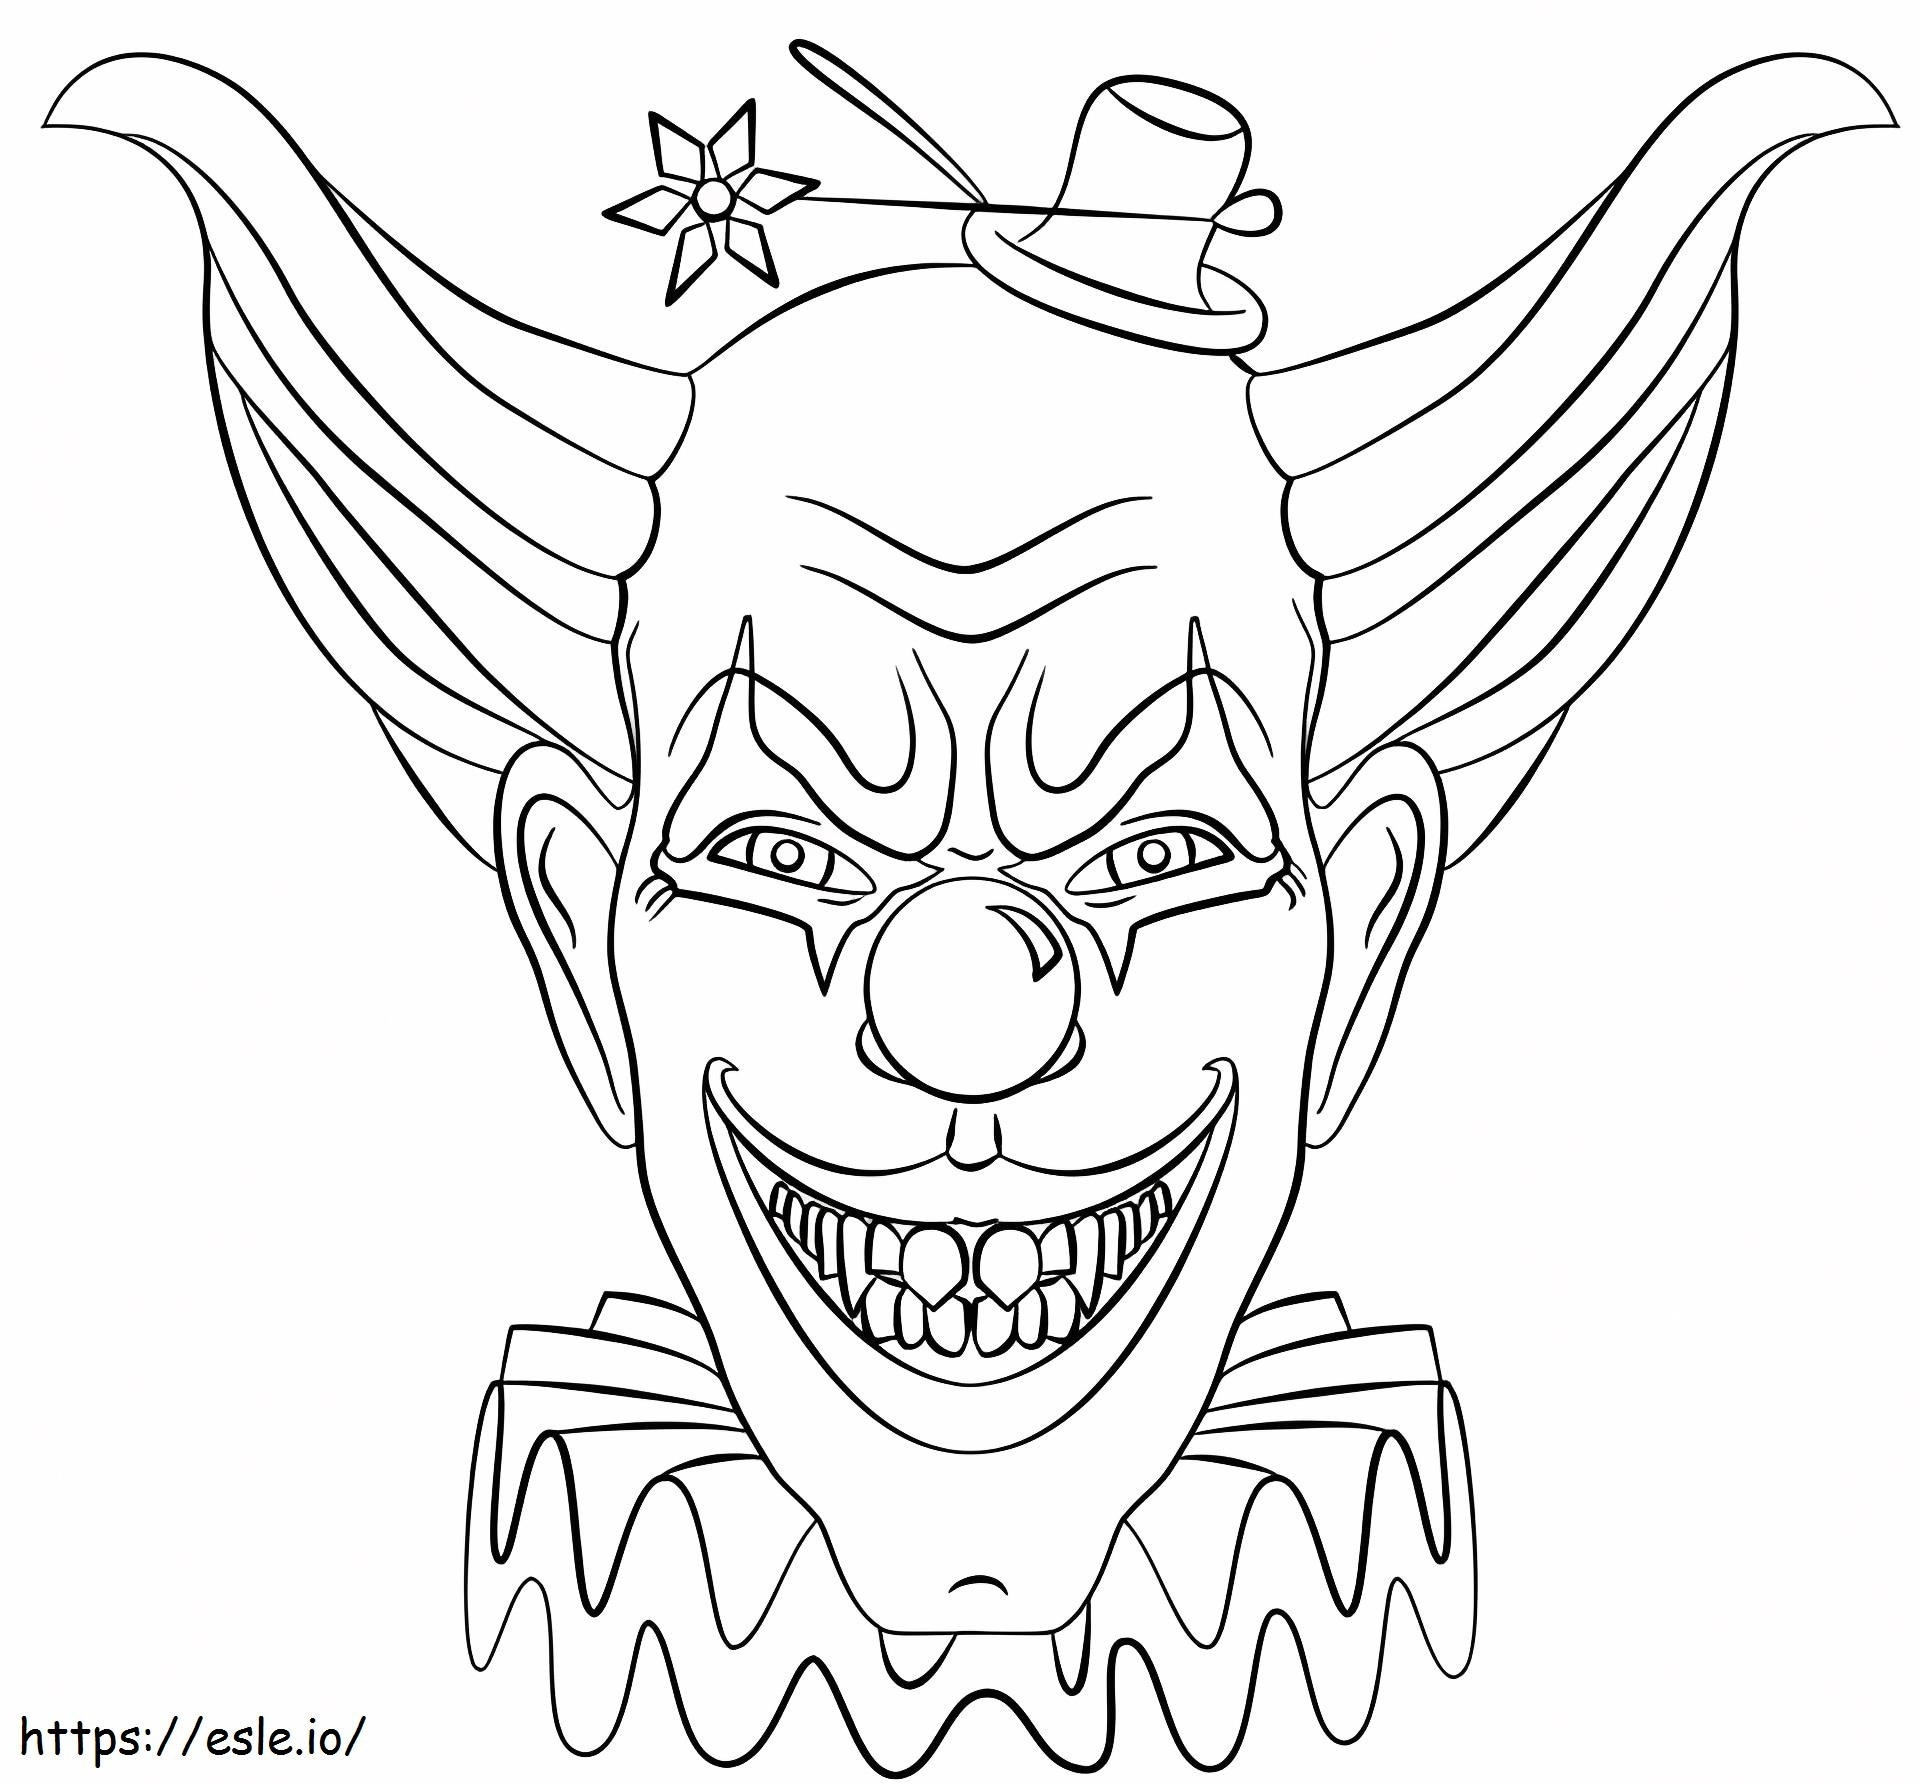 Angry Clown coloring page